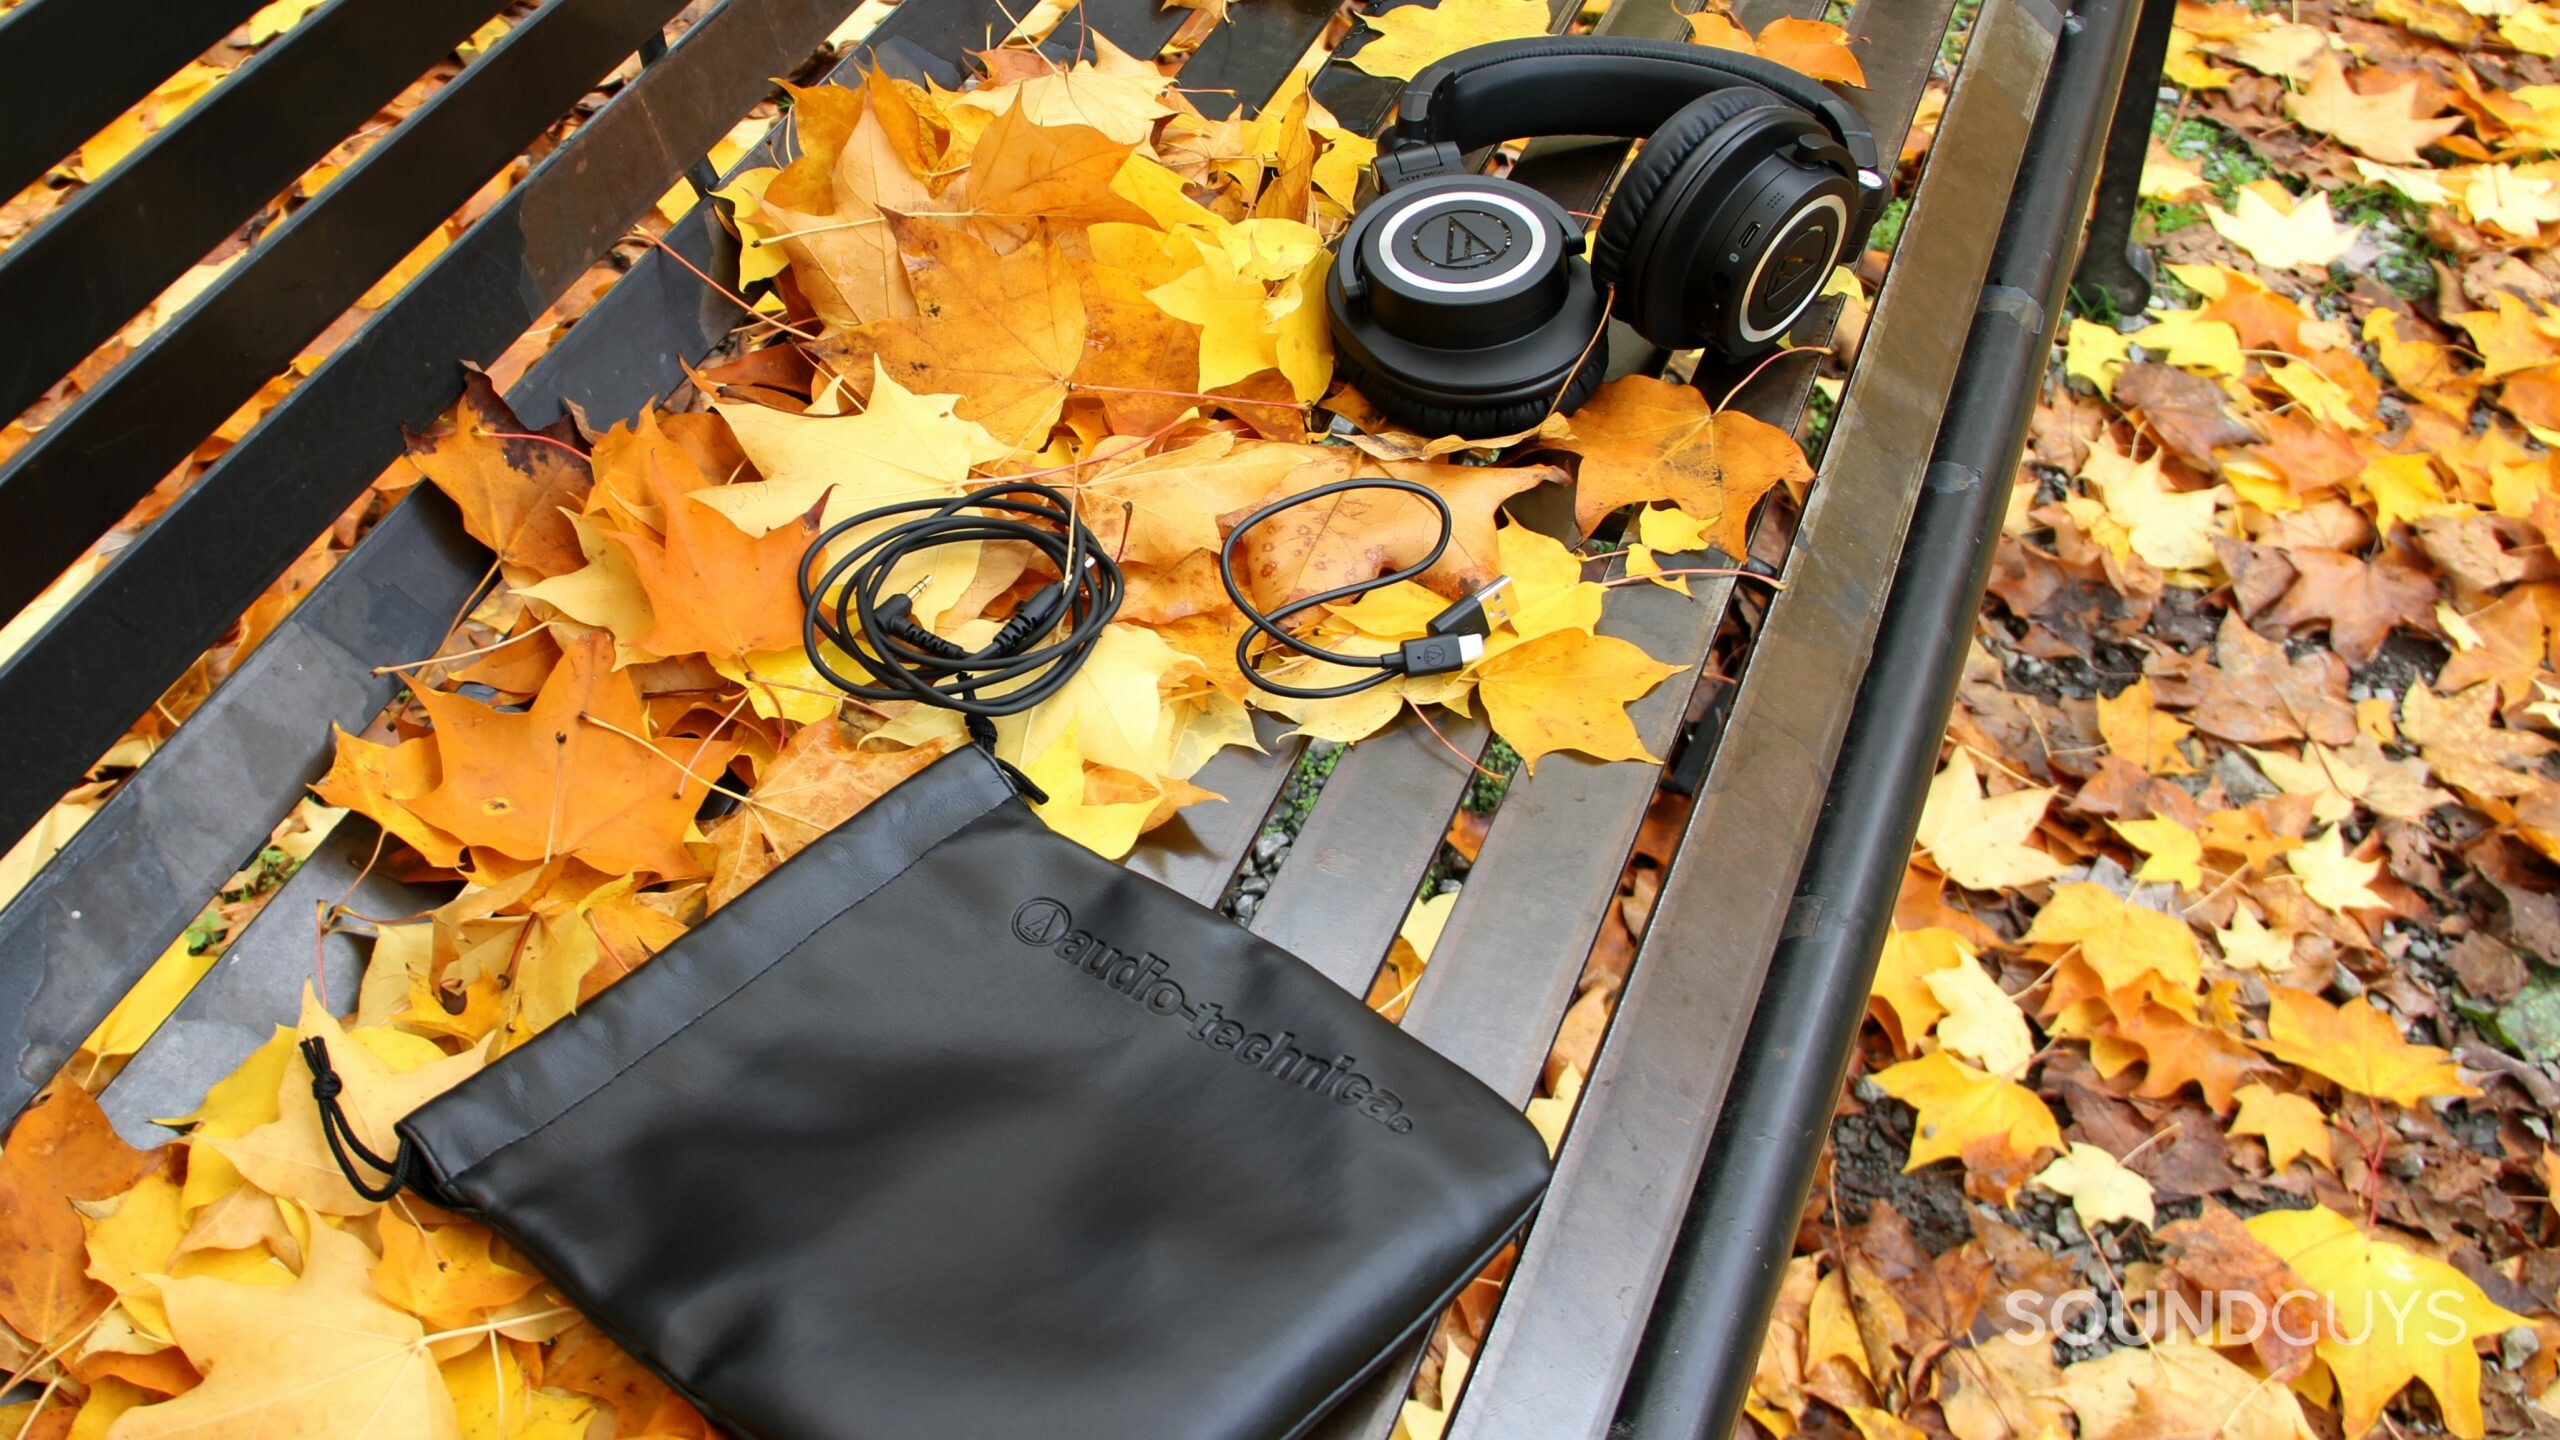 Audio-Technica ATH-M50xBT2 with pouch, USB cable, and headphone jack cable on a bench.